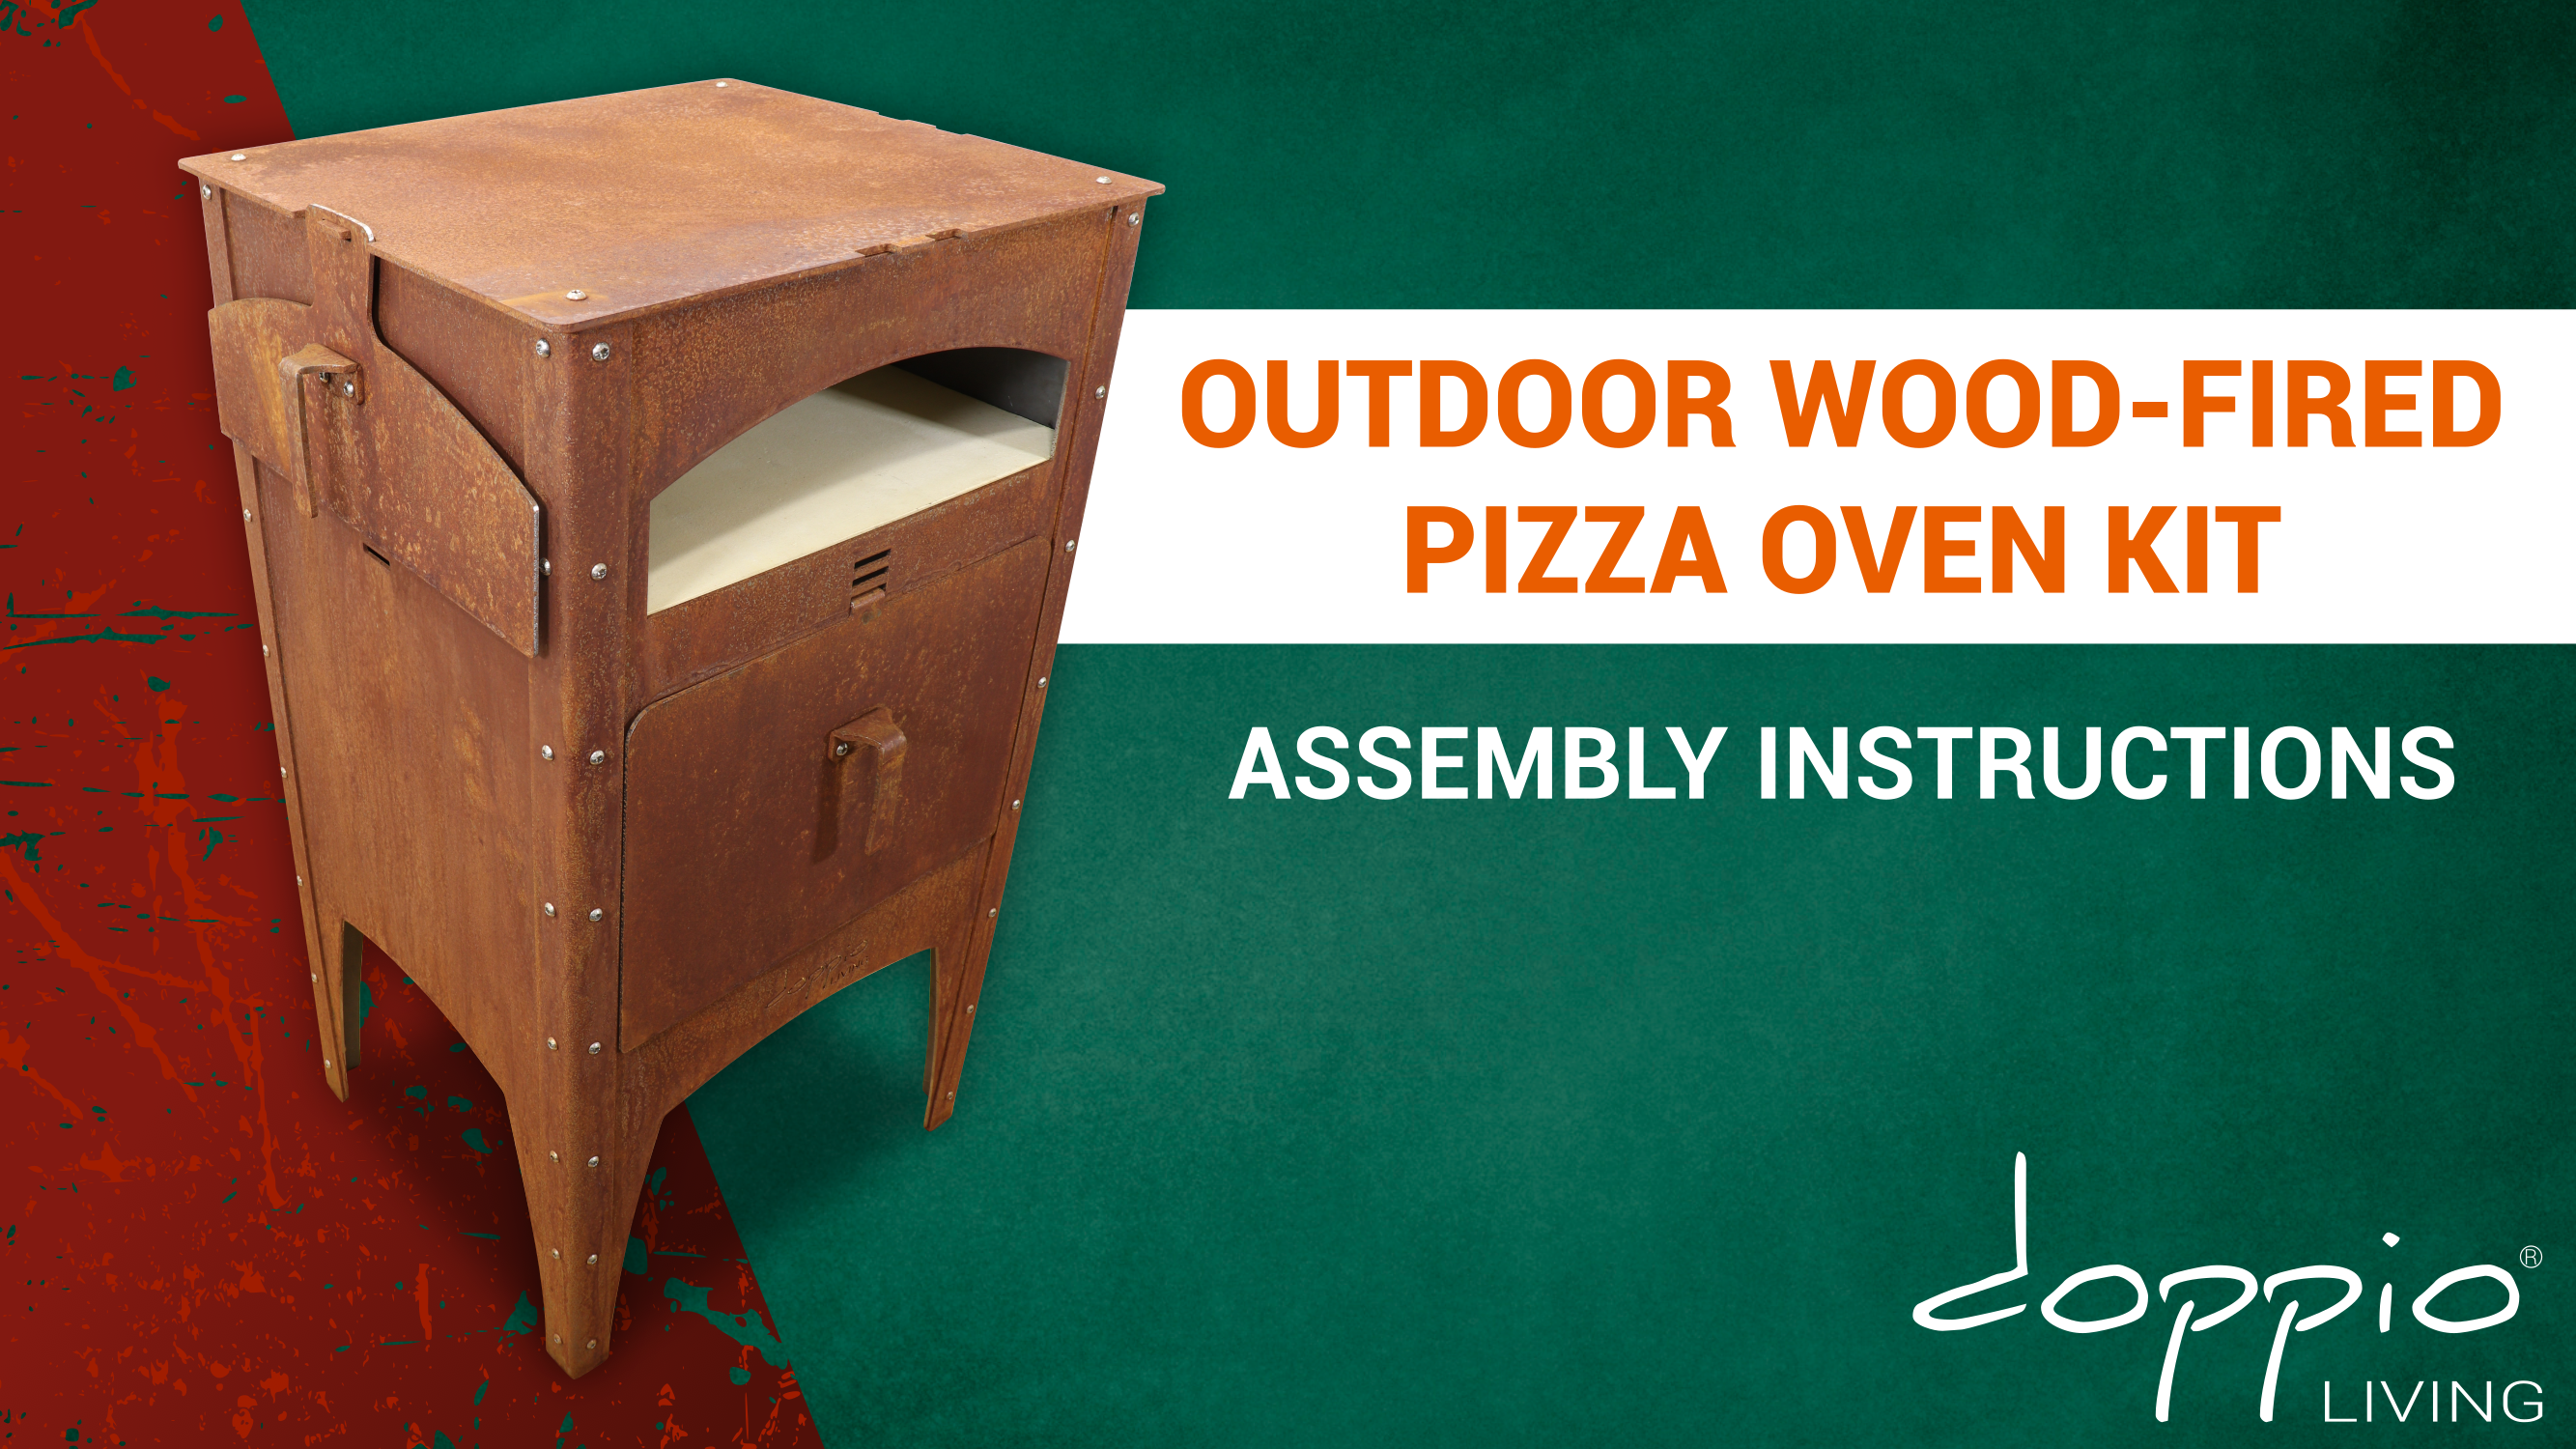 Load video: Assembly Instructions for Outdoor Wood-fired Pizza Oven